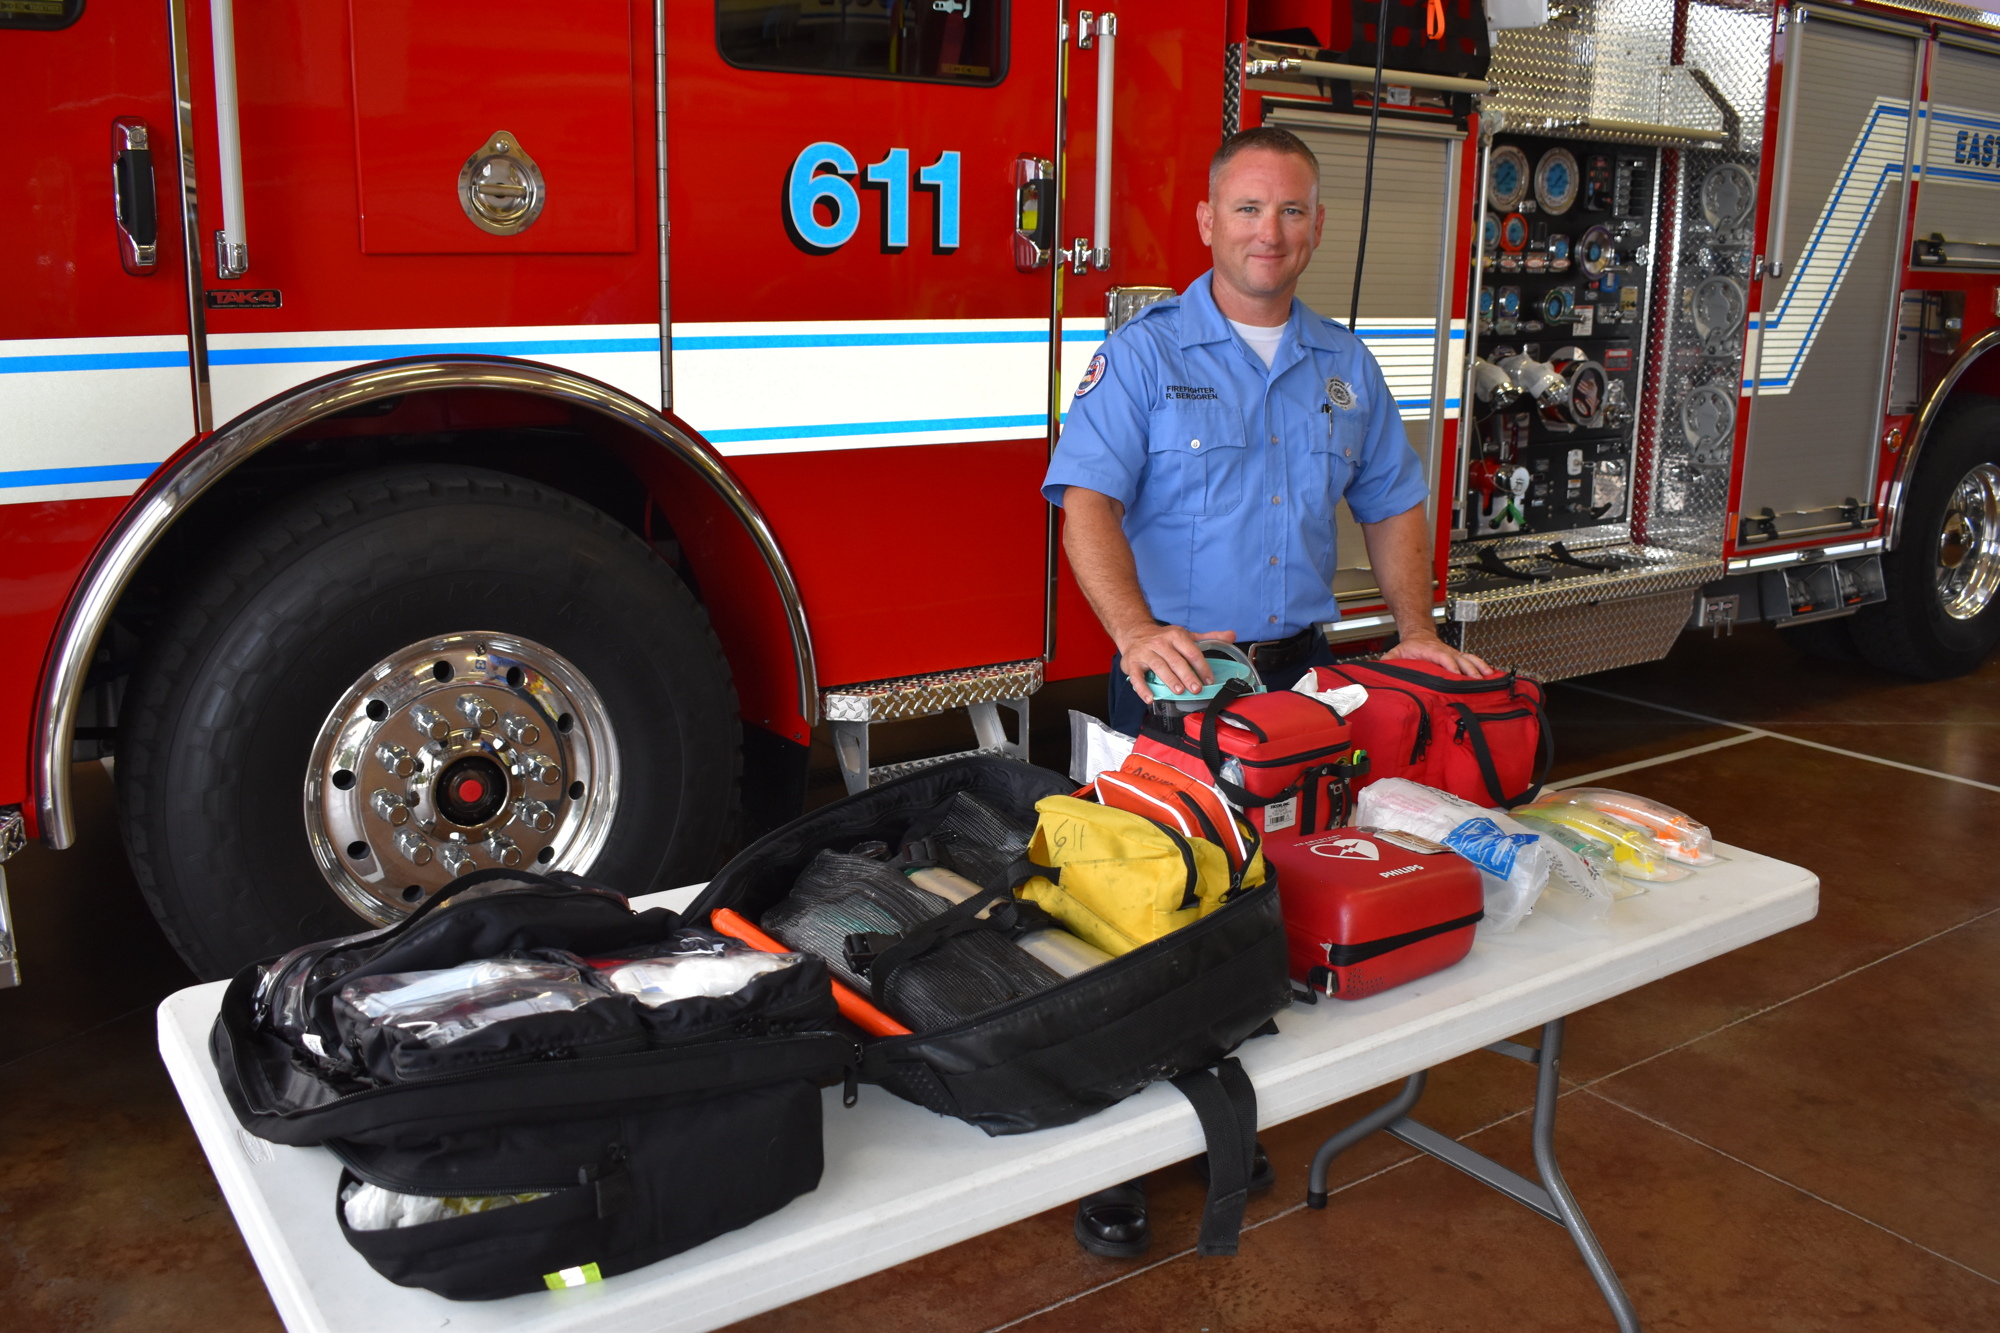 Firefighter Ryan Berggren lays out the Basic Life Support equipment the firefighters are currently utilizing including automated defibrillators, and oxygen and first aid equipment.